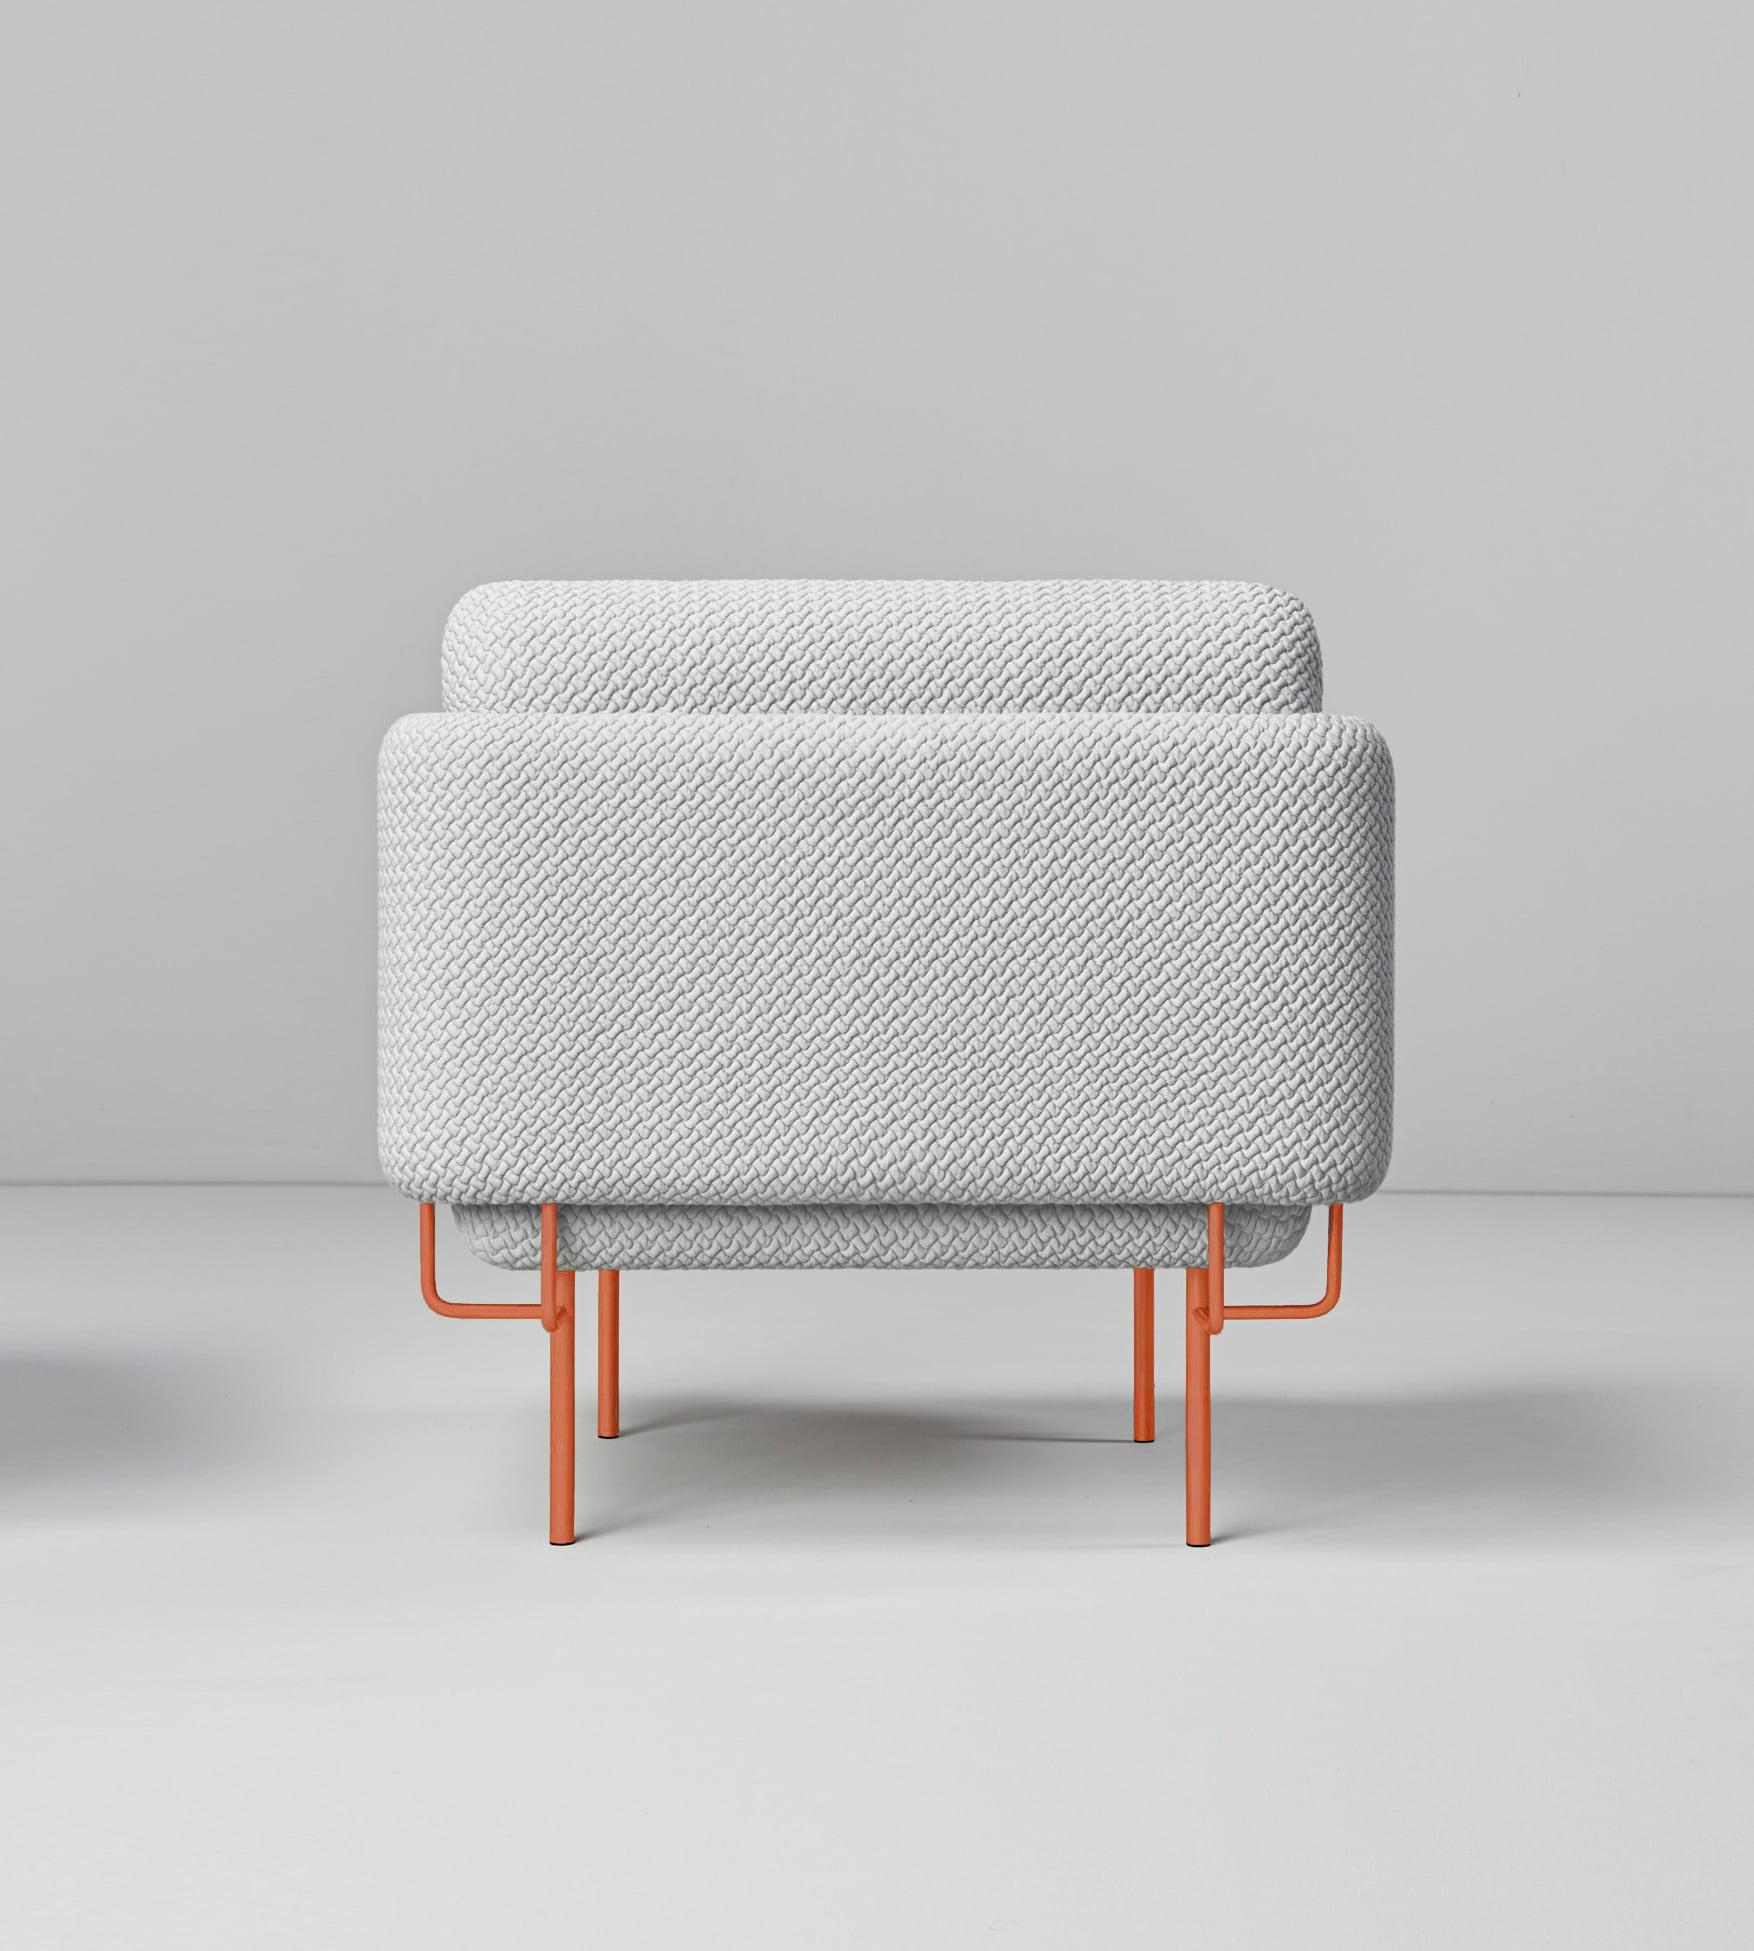 Alce armchair by Pepe Albargues
Dimensions: W 84, D 88, H 82, seat height45
Materials: Iron structure and MDF board
Foam CMHR (high resilience and flame retardant) for all our cushion filling systems.
Painted or chromed legs.

Variations of